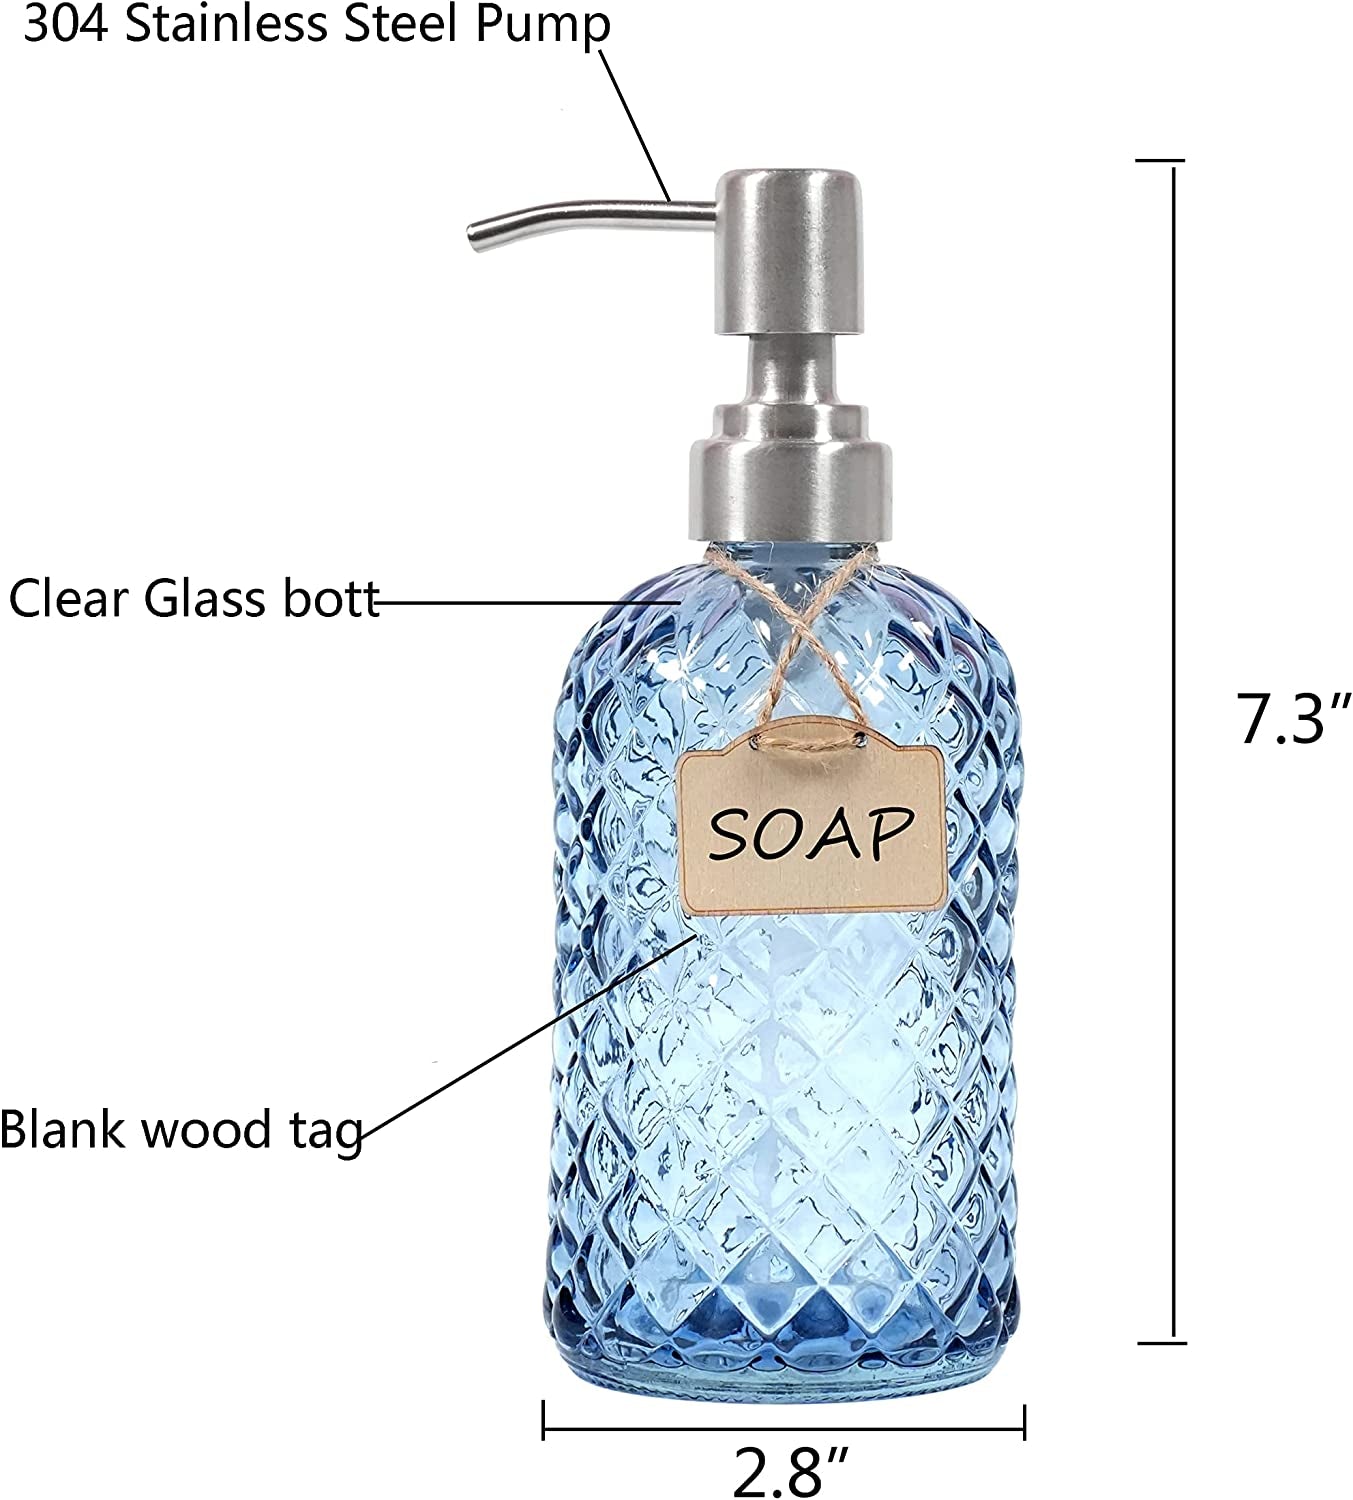 Spring Bathroom & Kitchen Glass Hand and Dish Soap Dispenser 